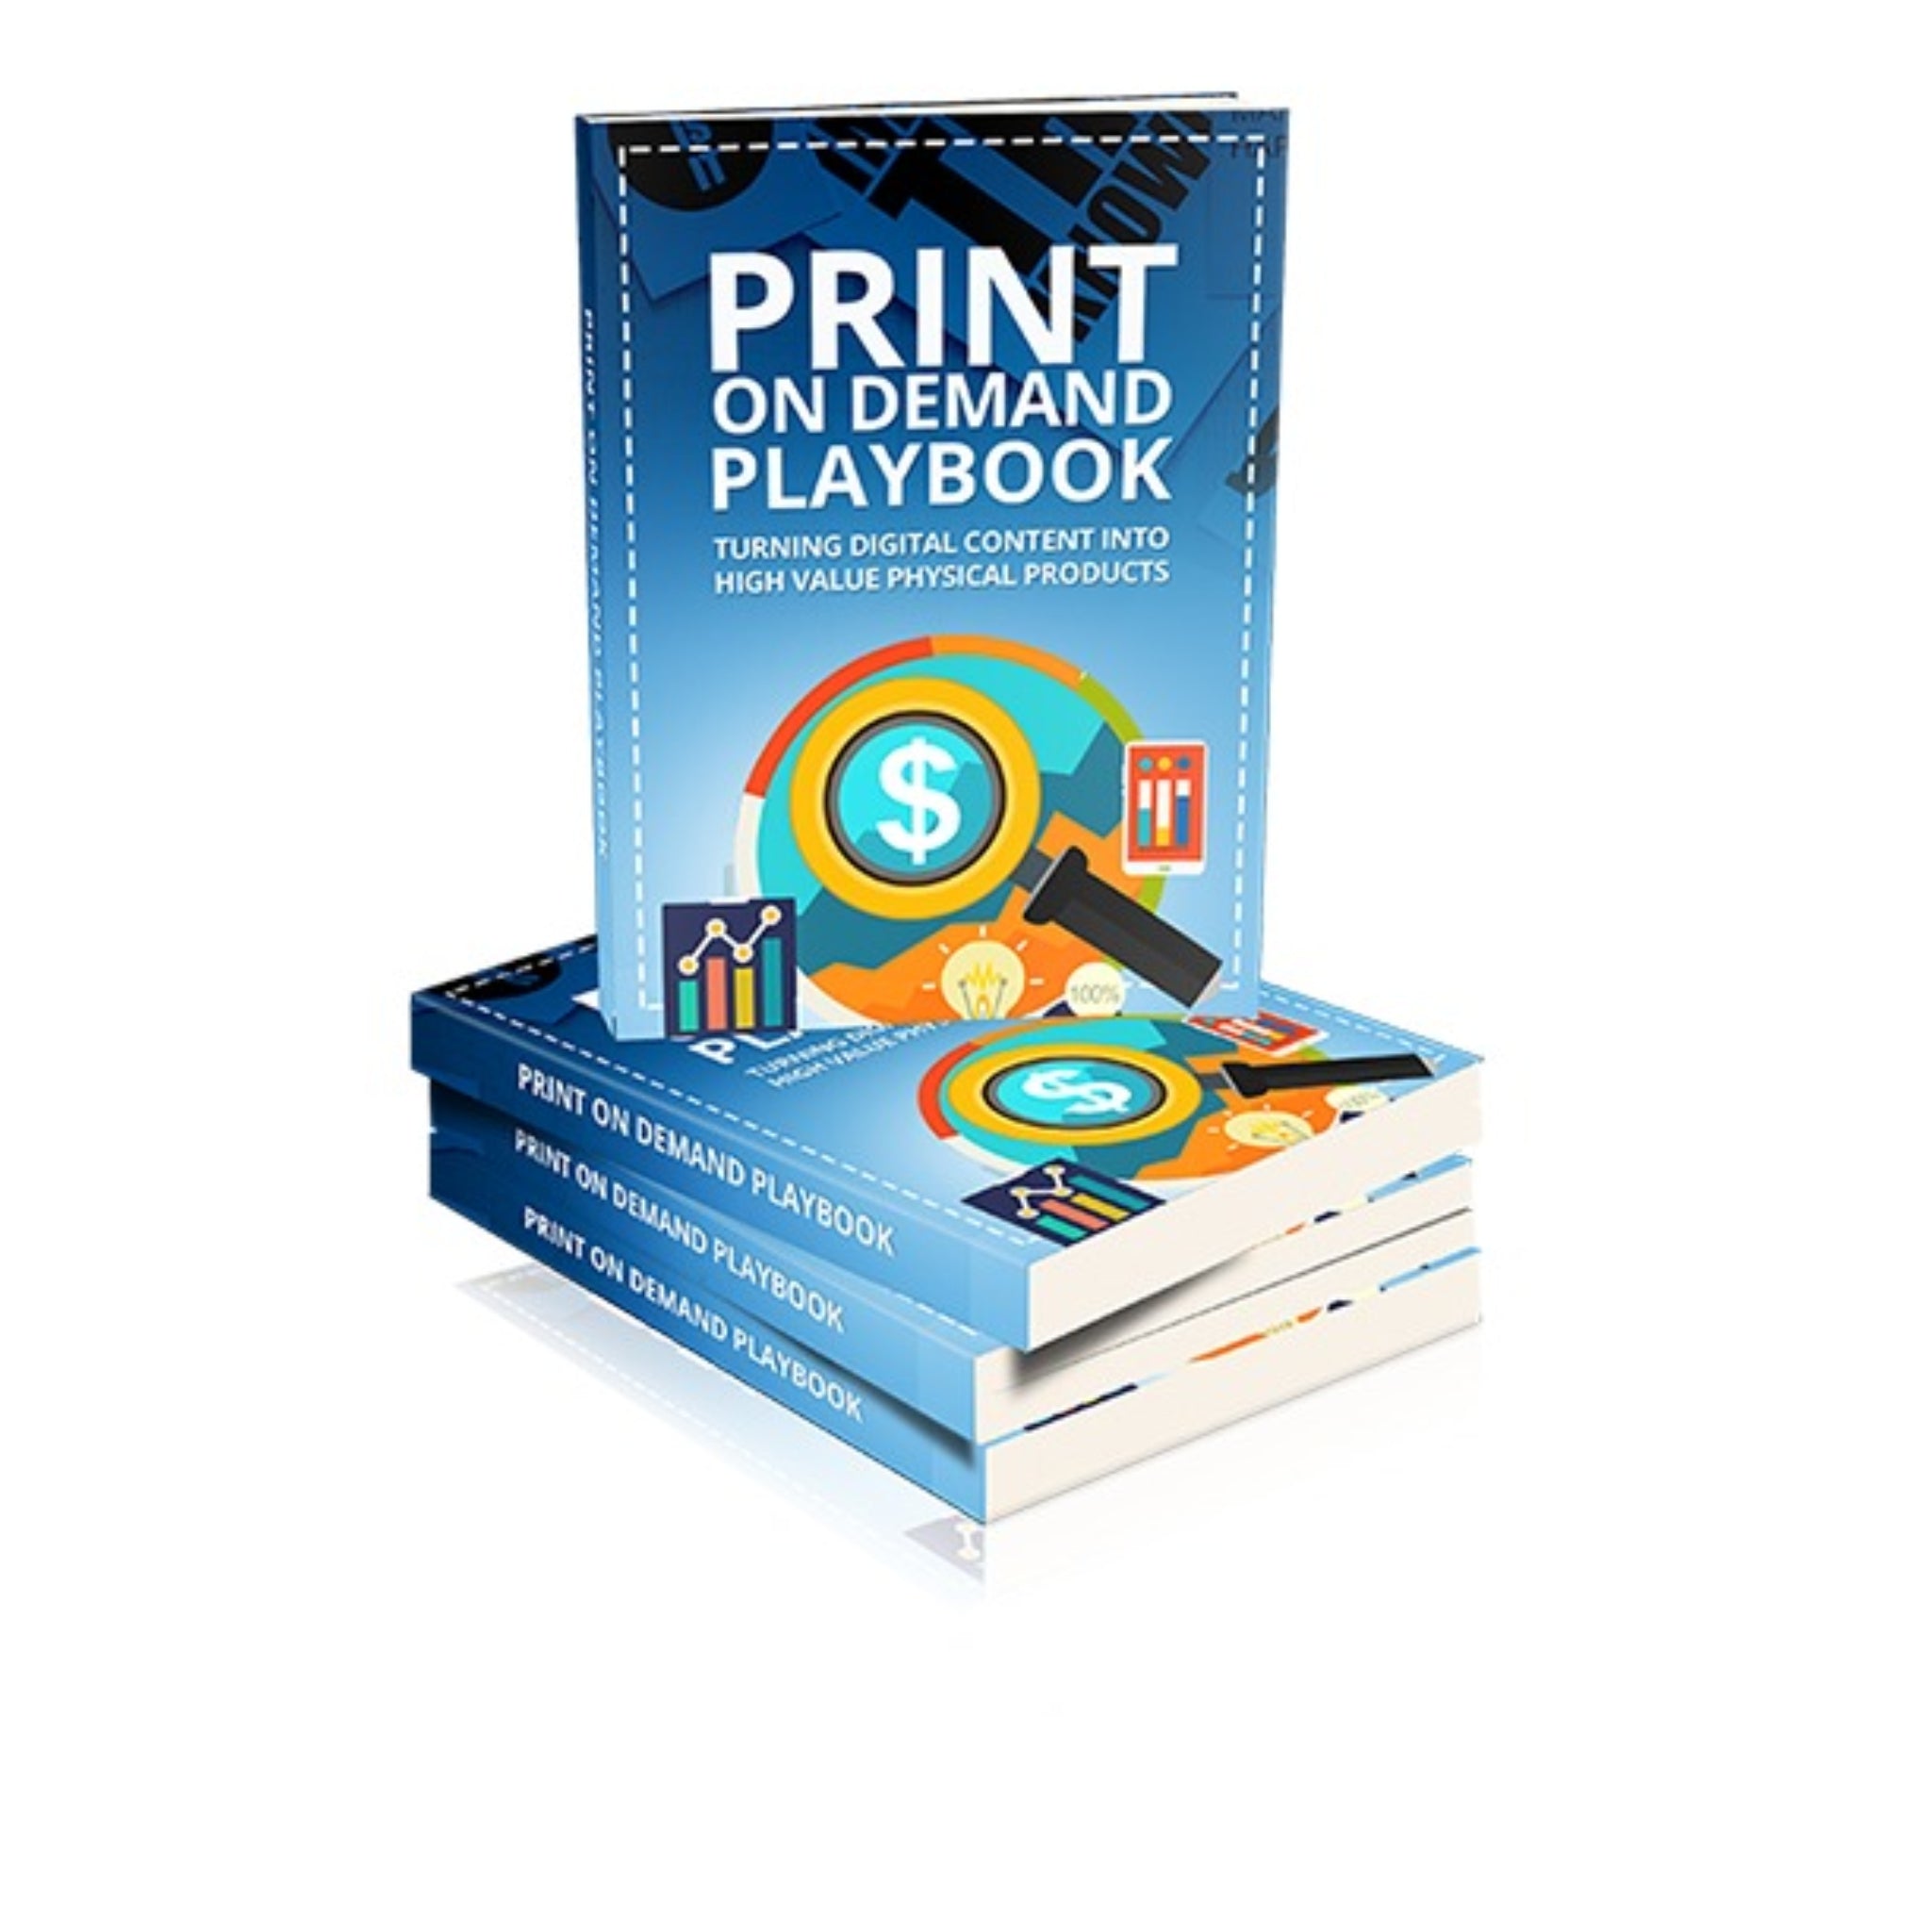 Print On Demand Playbook Video Guide